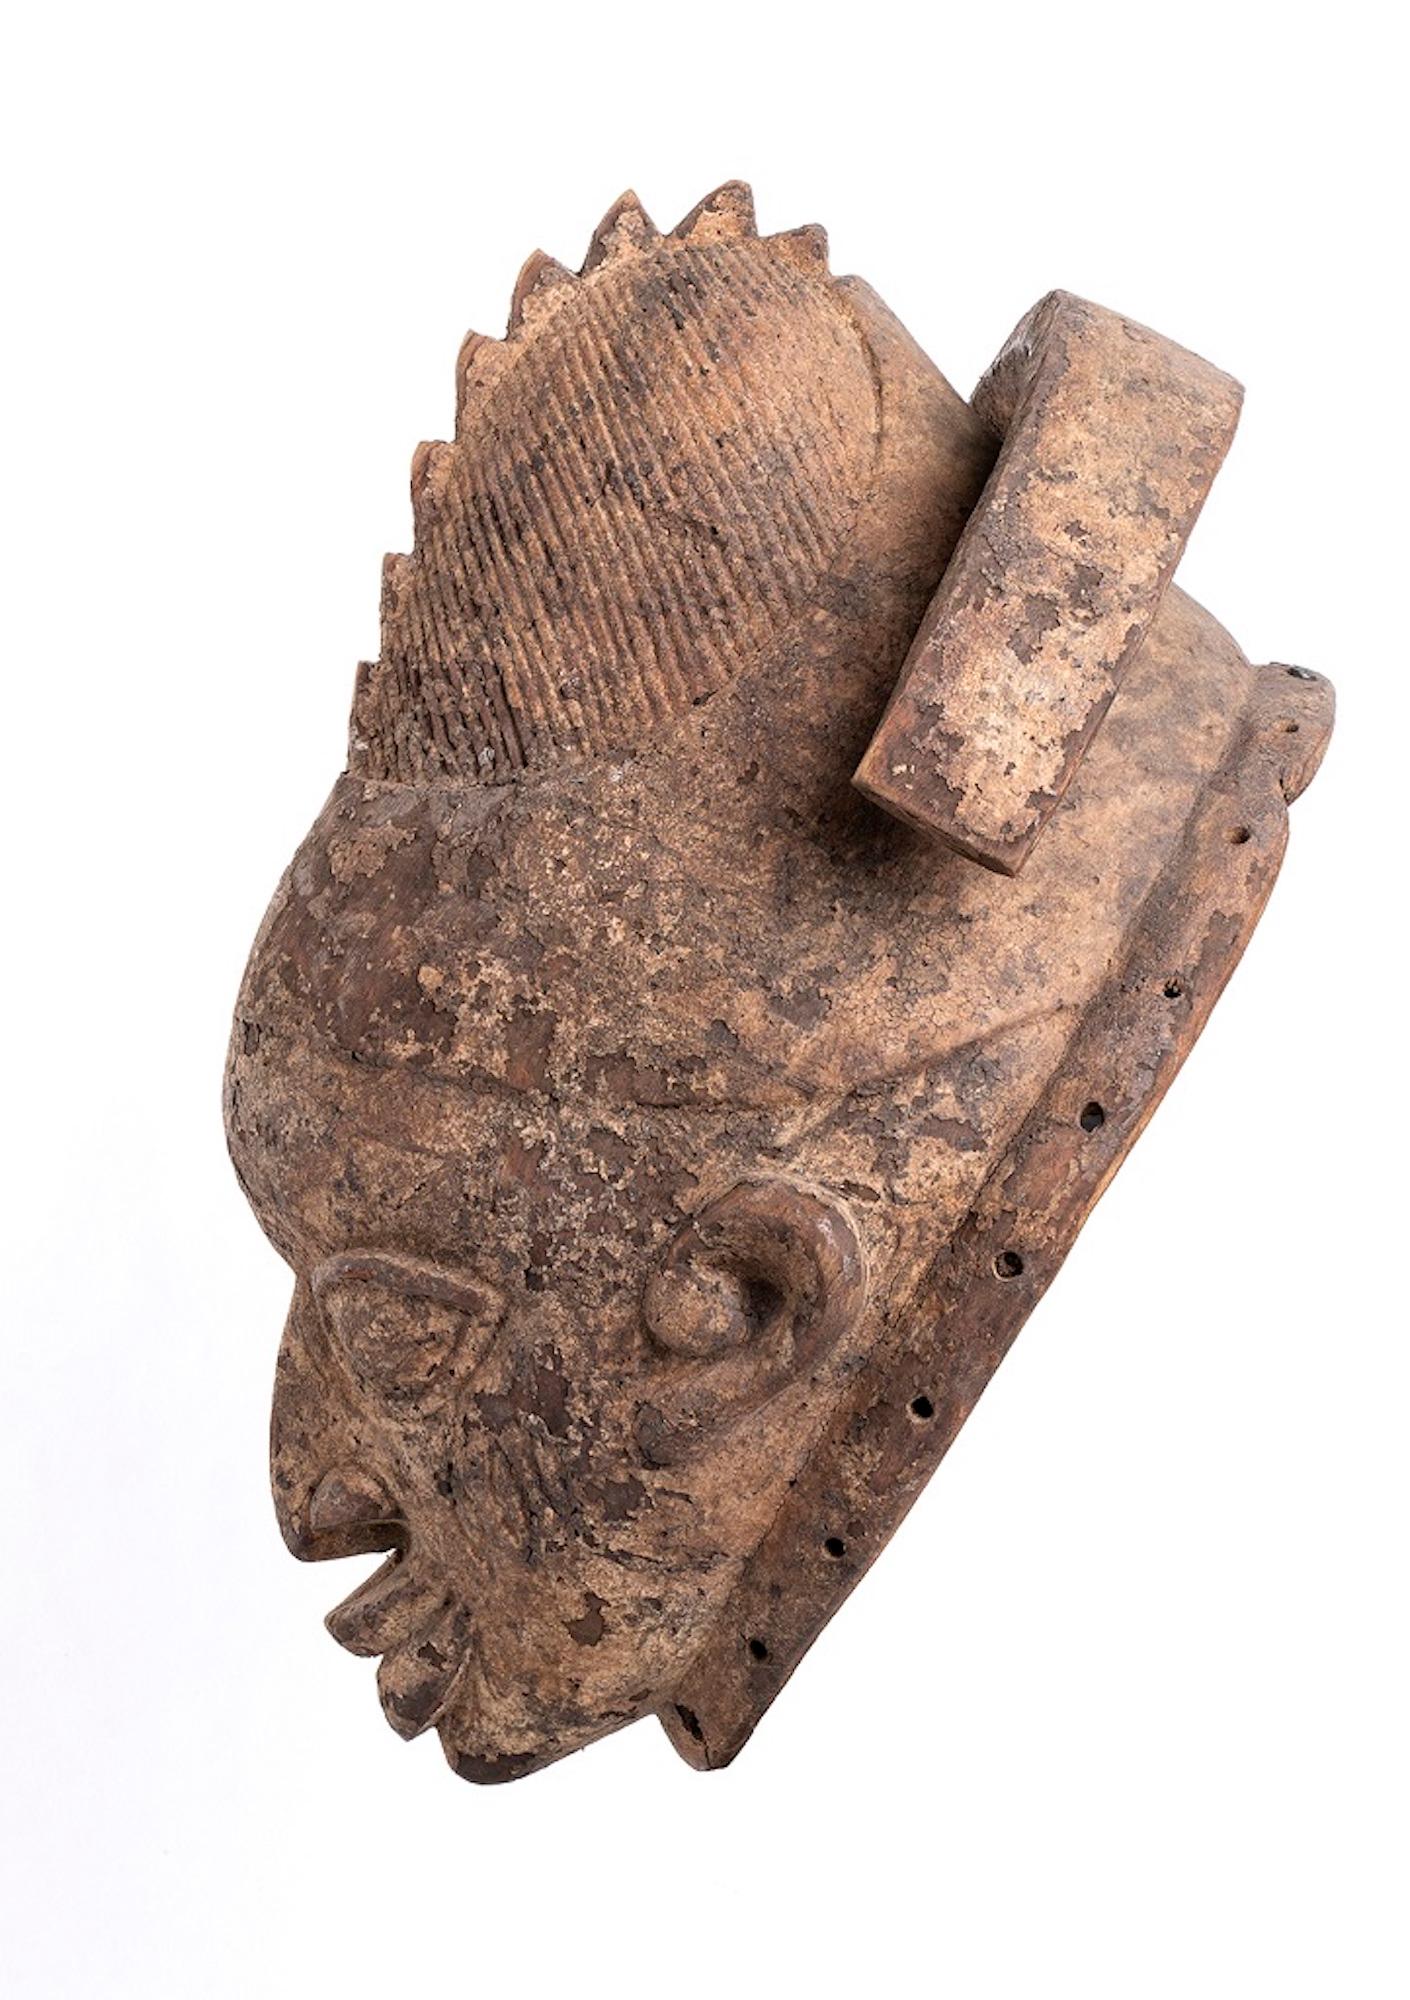 Yoruba wooden mask is an original manufact realized by Yoruba People (Nigeria/Benin).

Original handmade wood sculpture.

Mint conditions. 

Provenance: Private collection. 

Impressive handmade wooden mask representing one of the typical